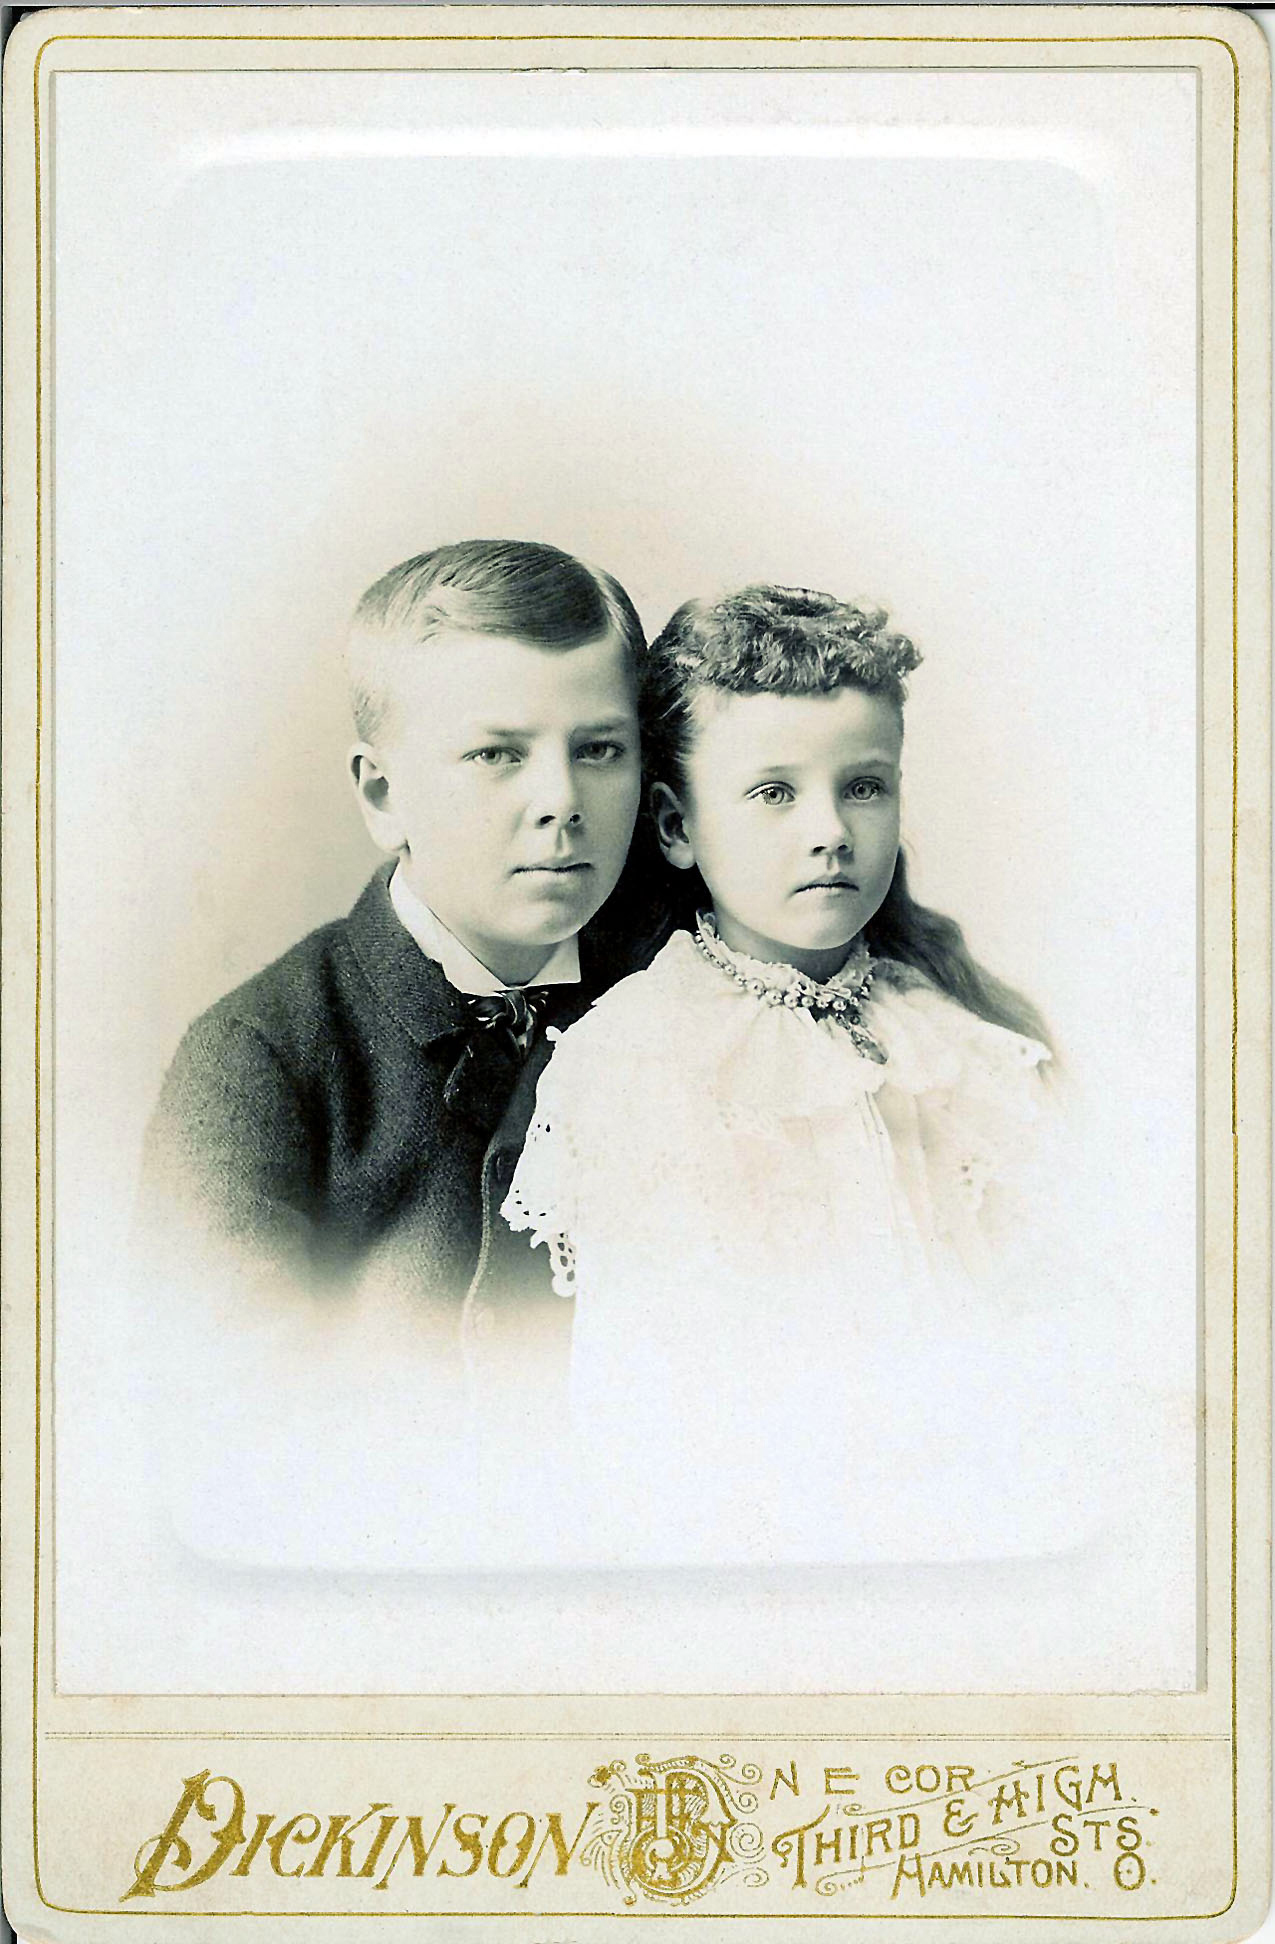 Photo of young sibilings Charley and Edna Billingslea